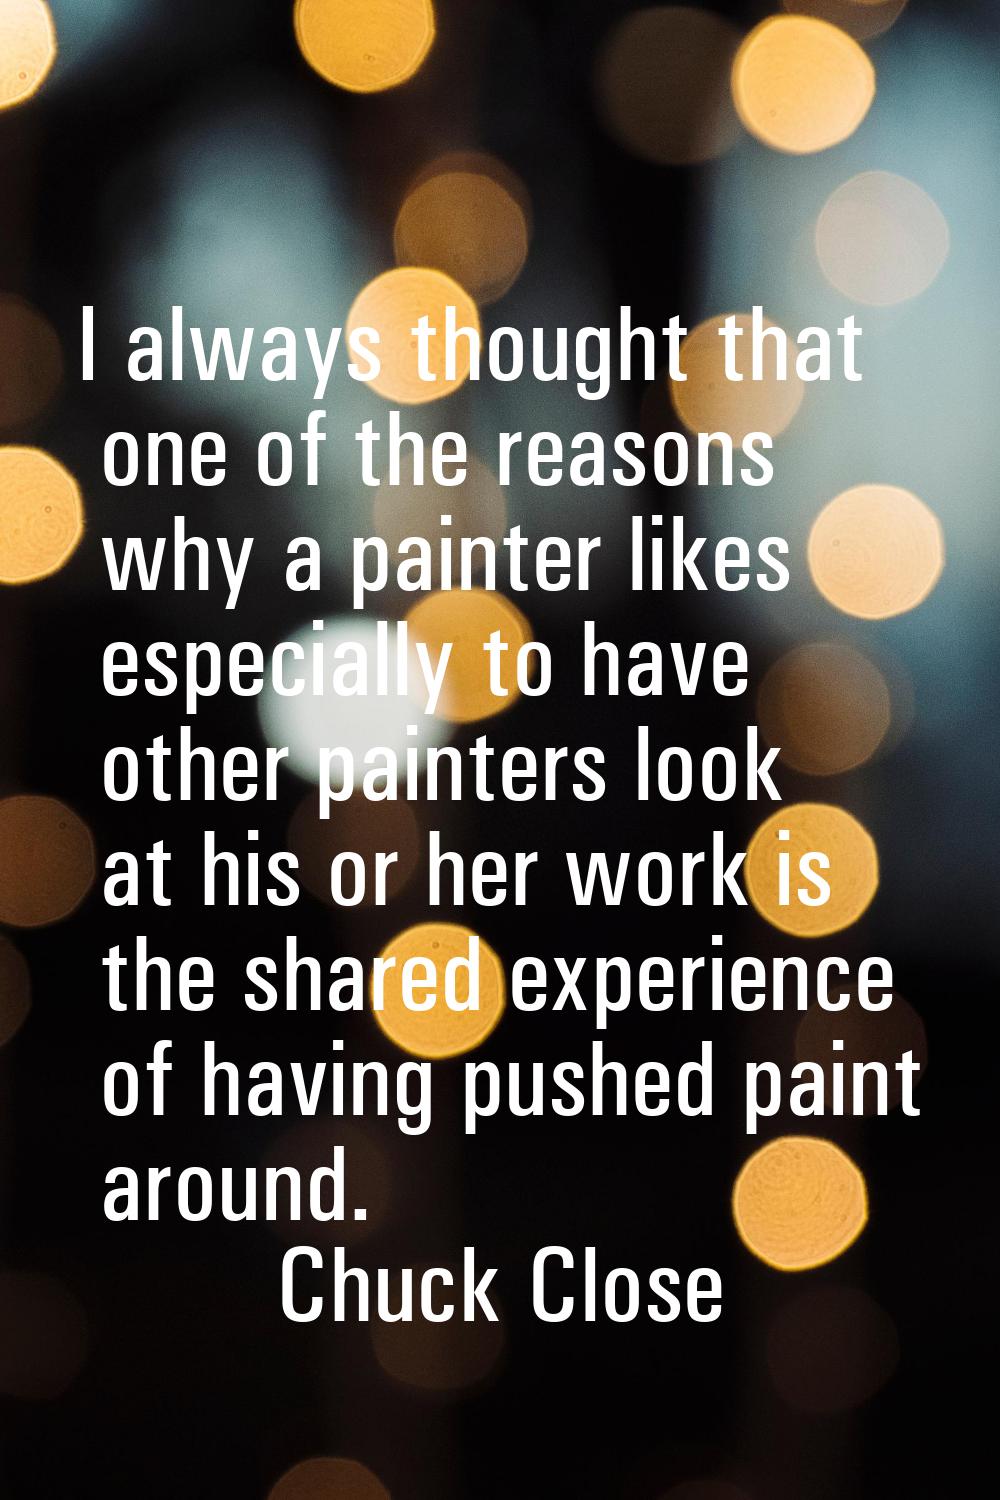 I always thought that one of the reasons why a painter likes especially to have other painters look